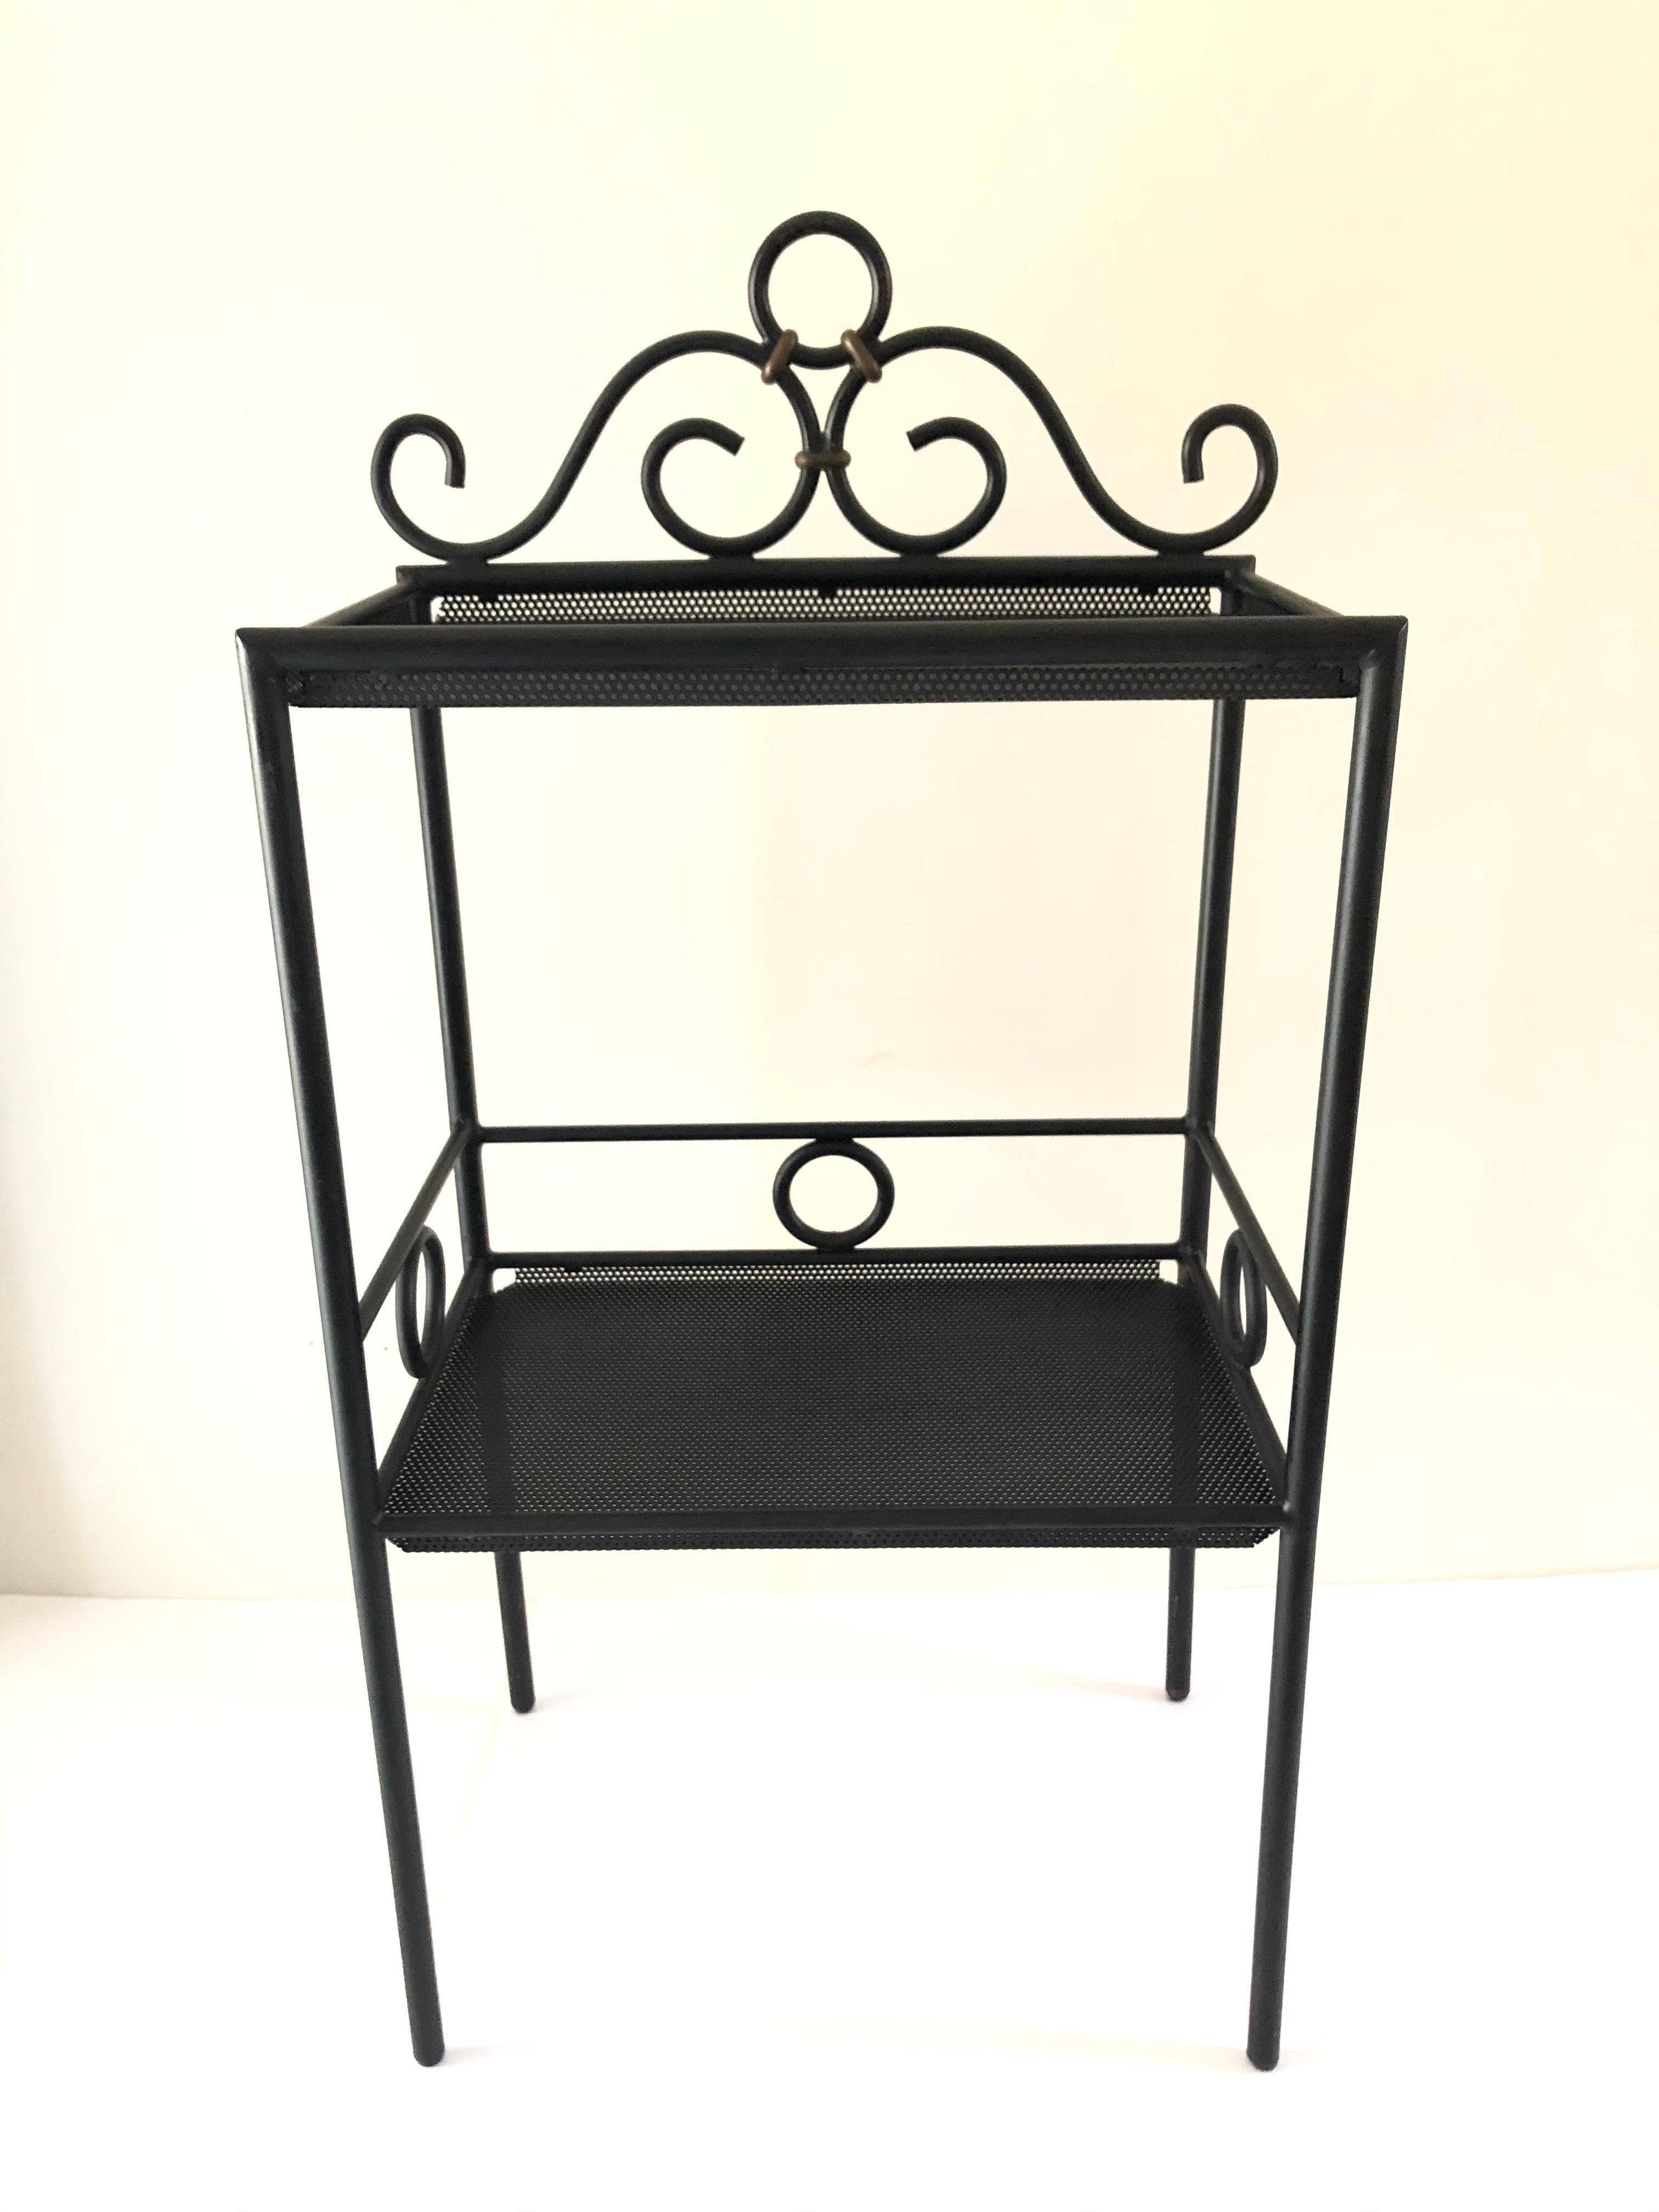 Mathieu Matégot black iron and bronze mesh two tier stand / shelf display
Piece. Hungarian born 1910 -2001, then turned nationality French designer circa 1950s, pioneered perforated sheet metal, collection Musee des Arts decoratifs, Paris.